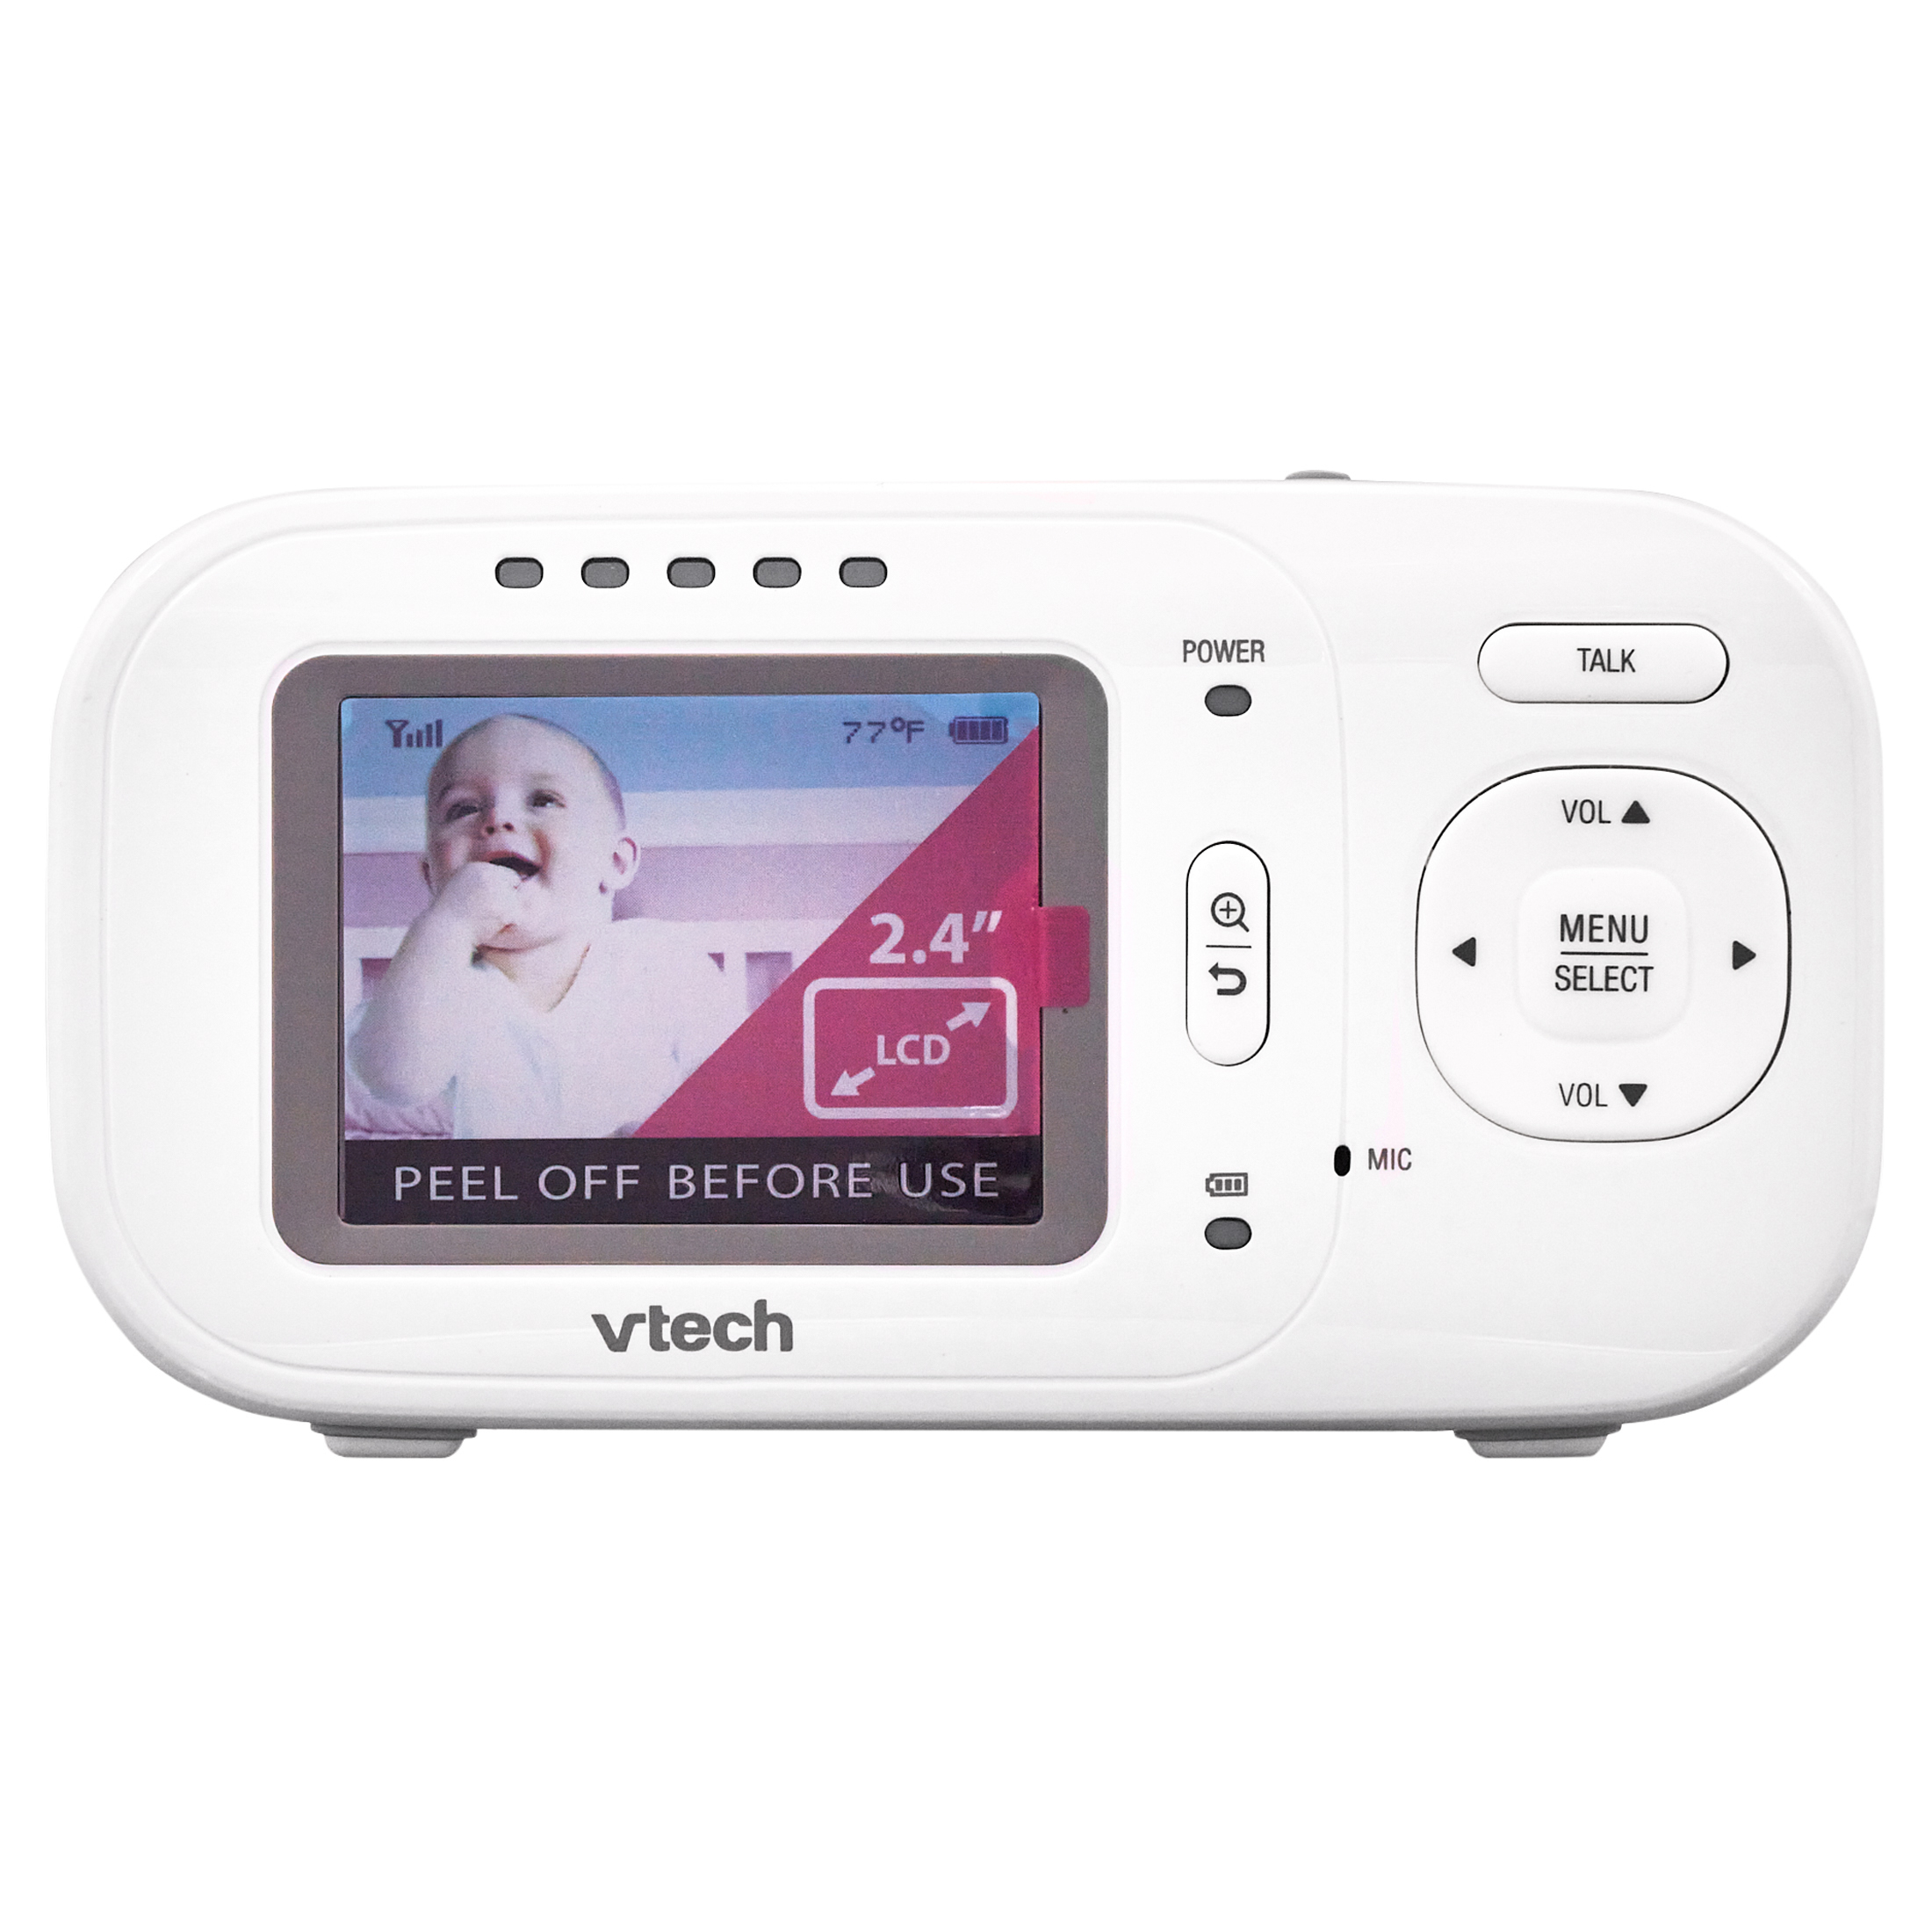 VTech VM320 2.4" Video Baby Monitor with Full-Color and Automatic Night Vision, White - image 5 of 8